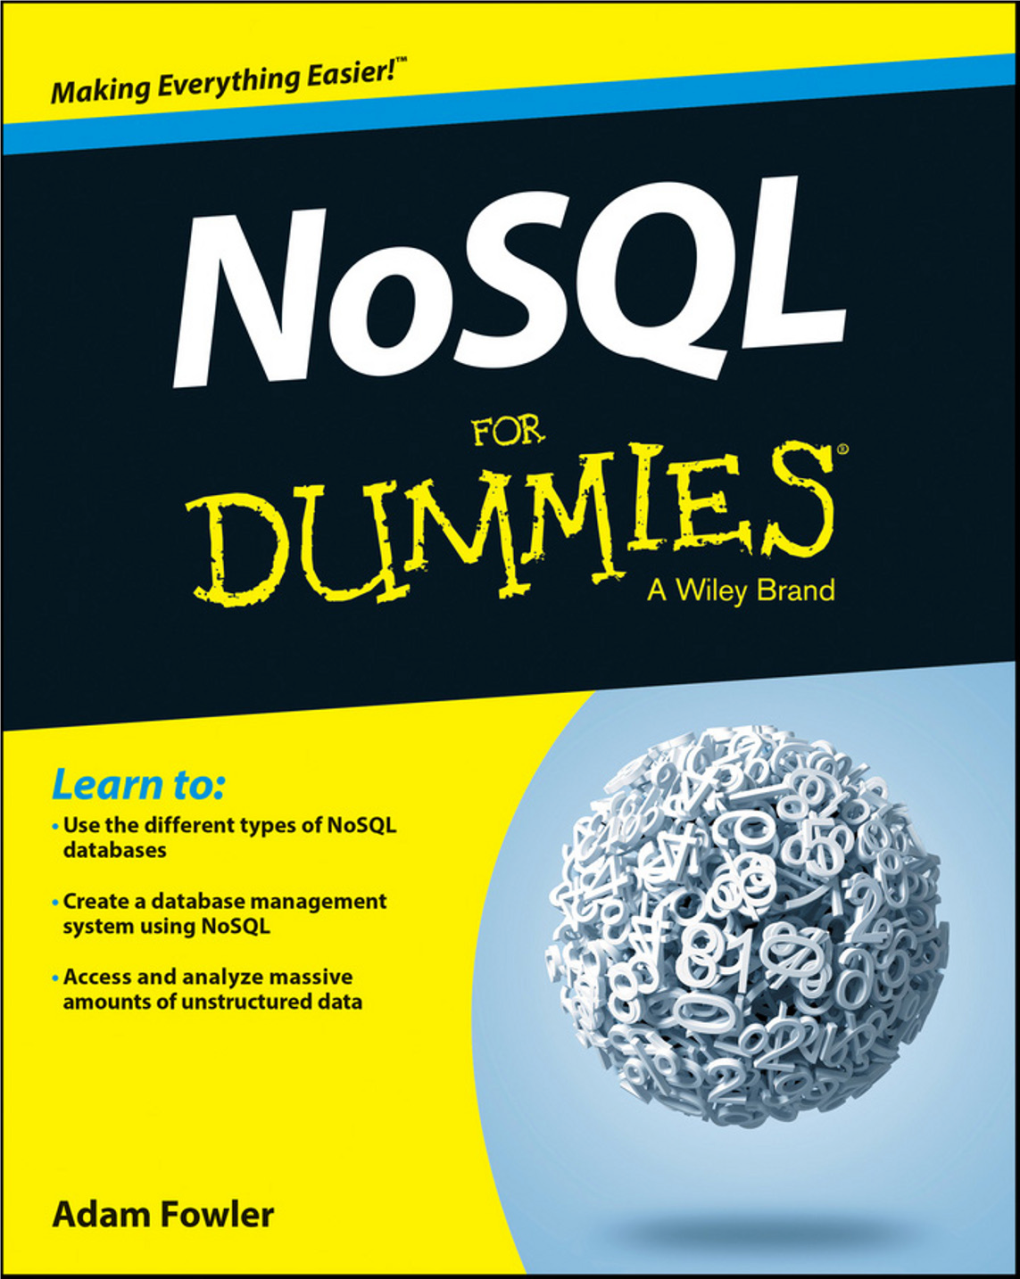 Nosql for Dummies®